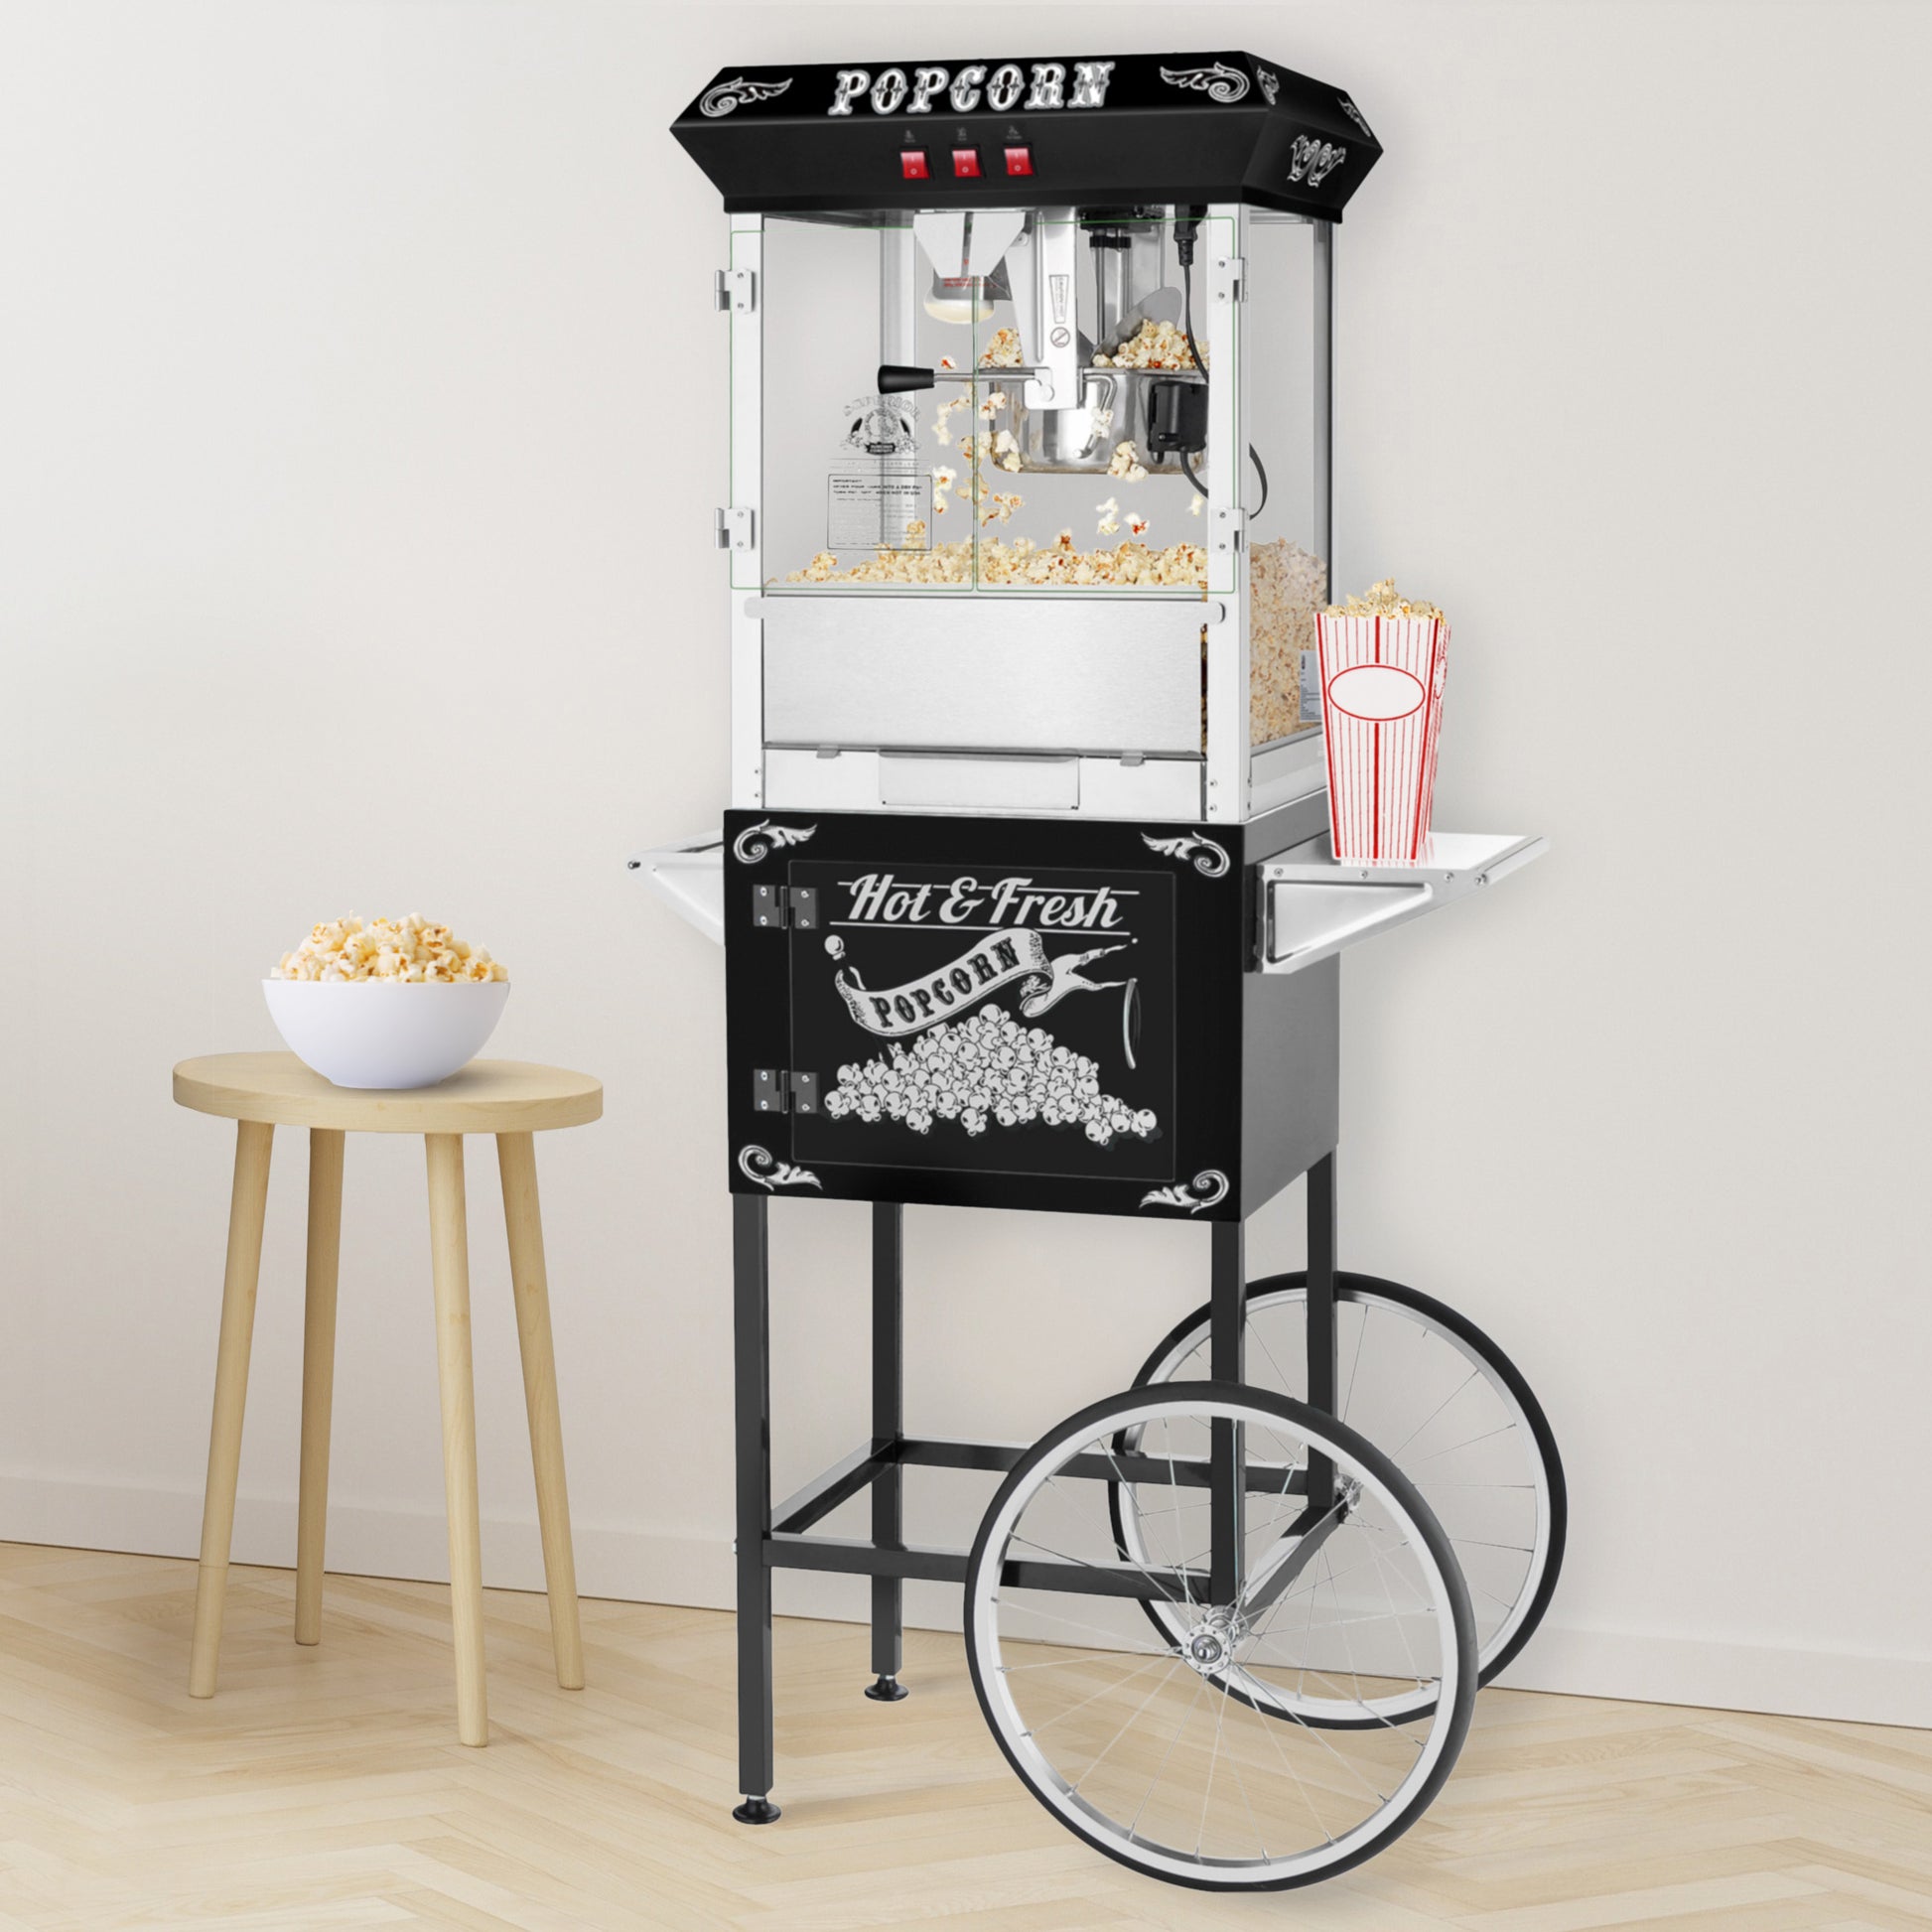 Popcorn Machine with Cart – 8oz Popper with Stainless-steel Kettle, Heated  Warming Deck, and Old Maids Drawer by Great Northern Popcorn (Black)